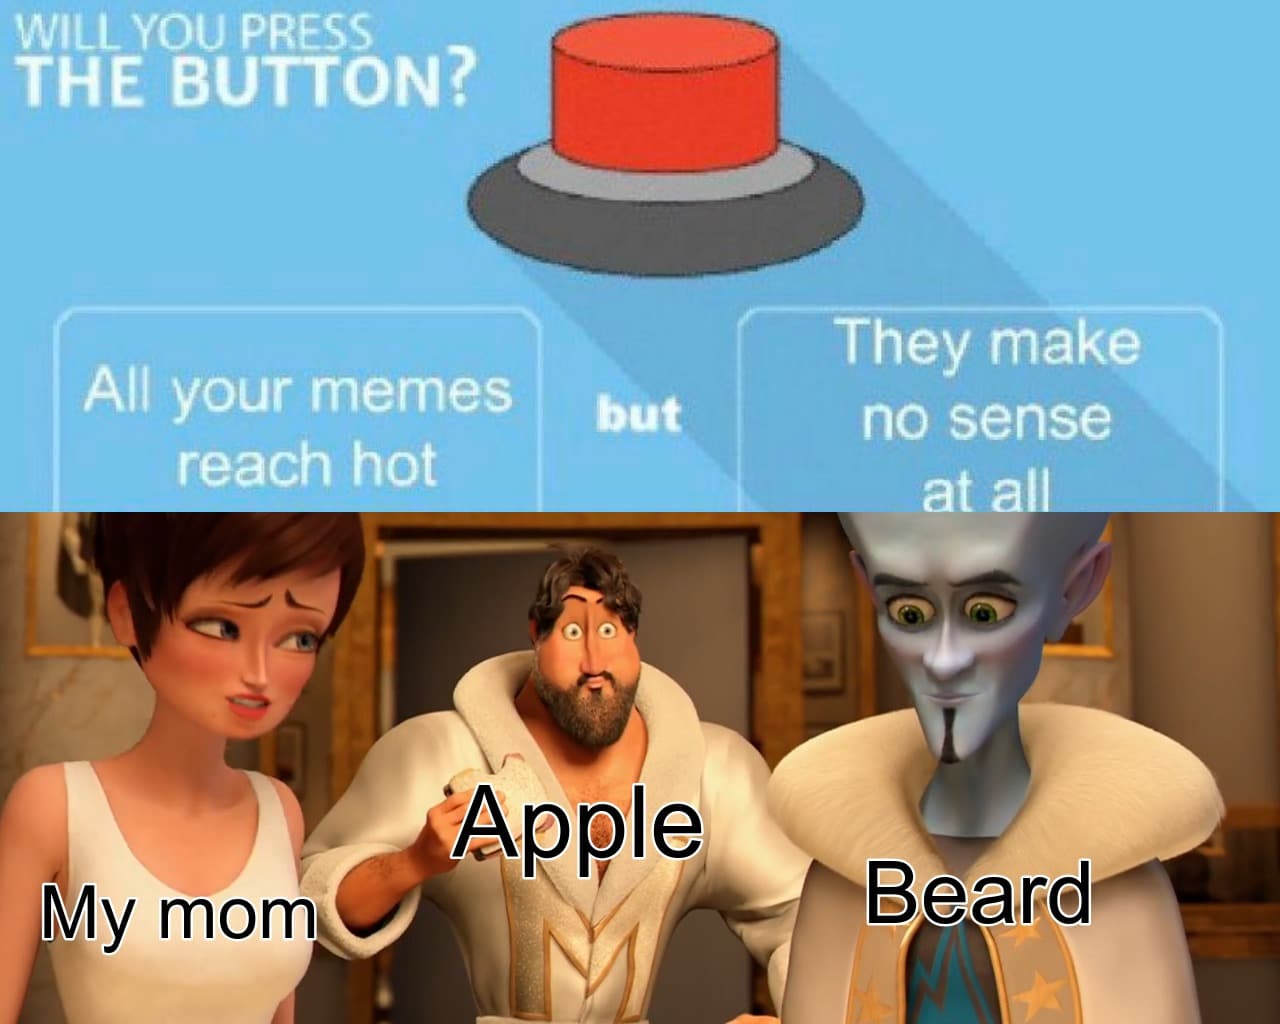 cute other-memes cute text: WILLYOÜPRESSU THE BUTTON? All your memes reach hot but Apple My mom They make no sense at all Beard 